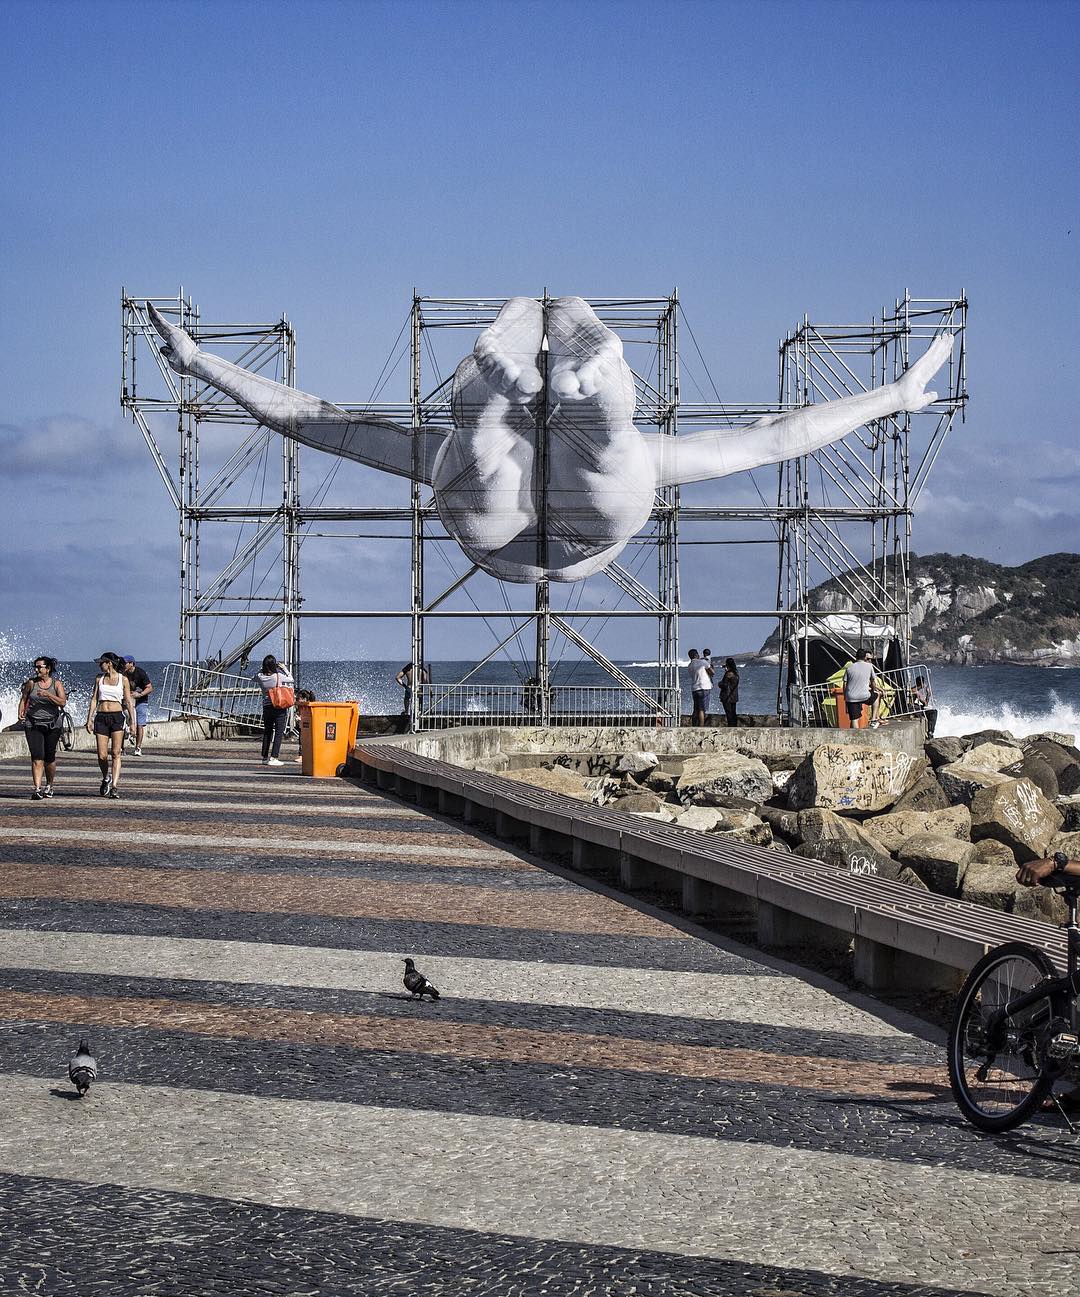 One of JR's GIANTS installations at the Brazilian Olympics